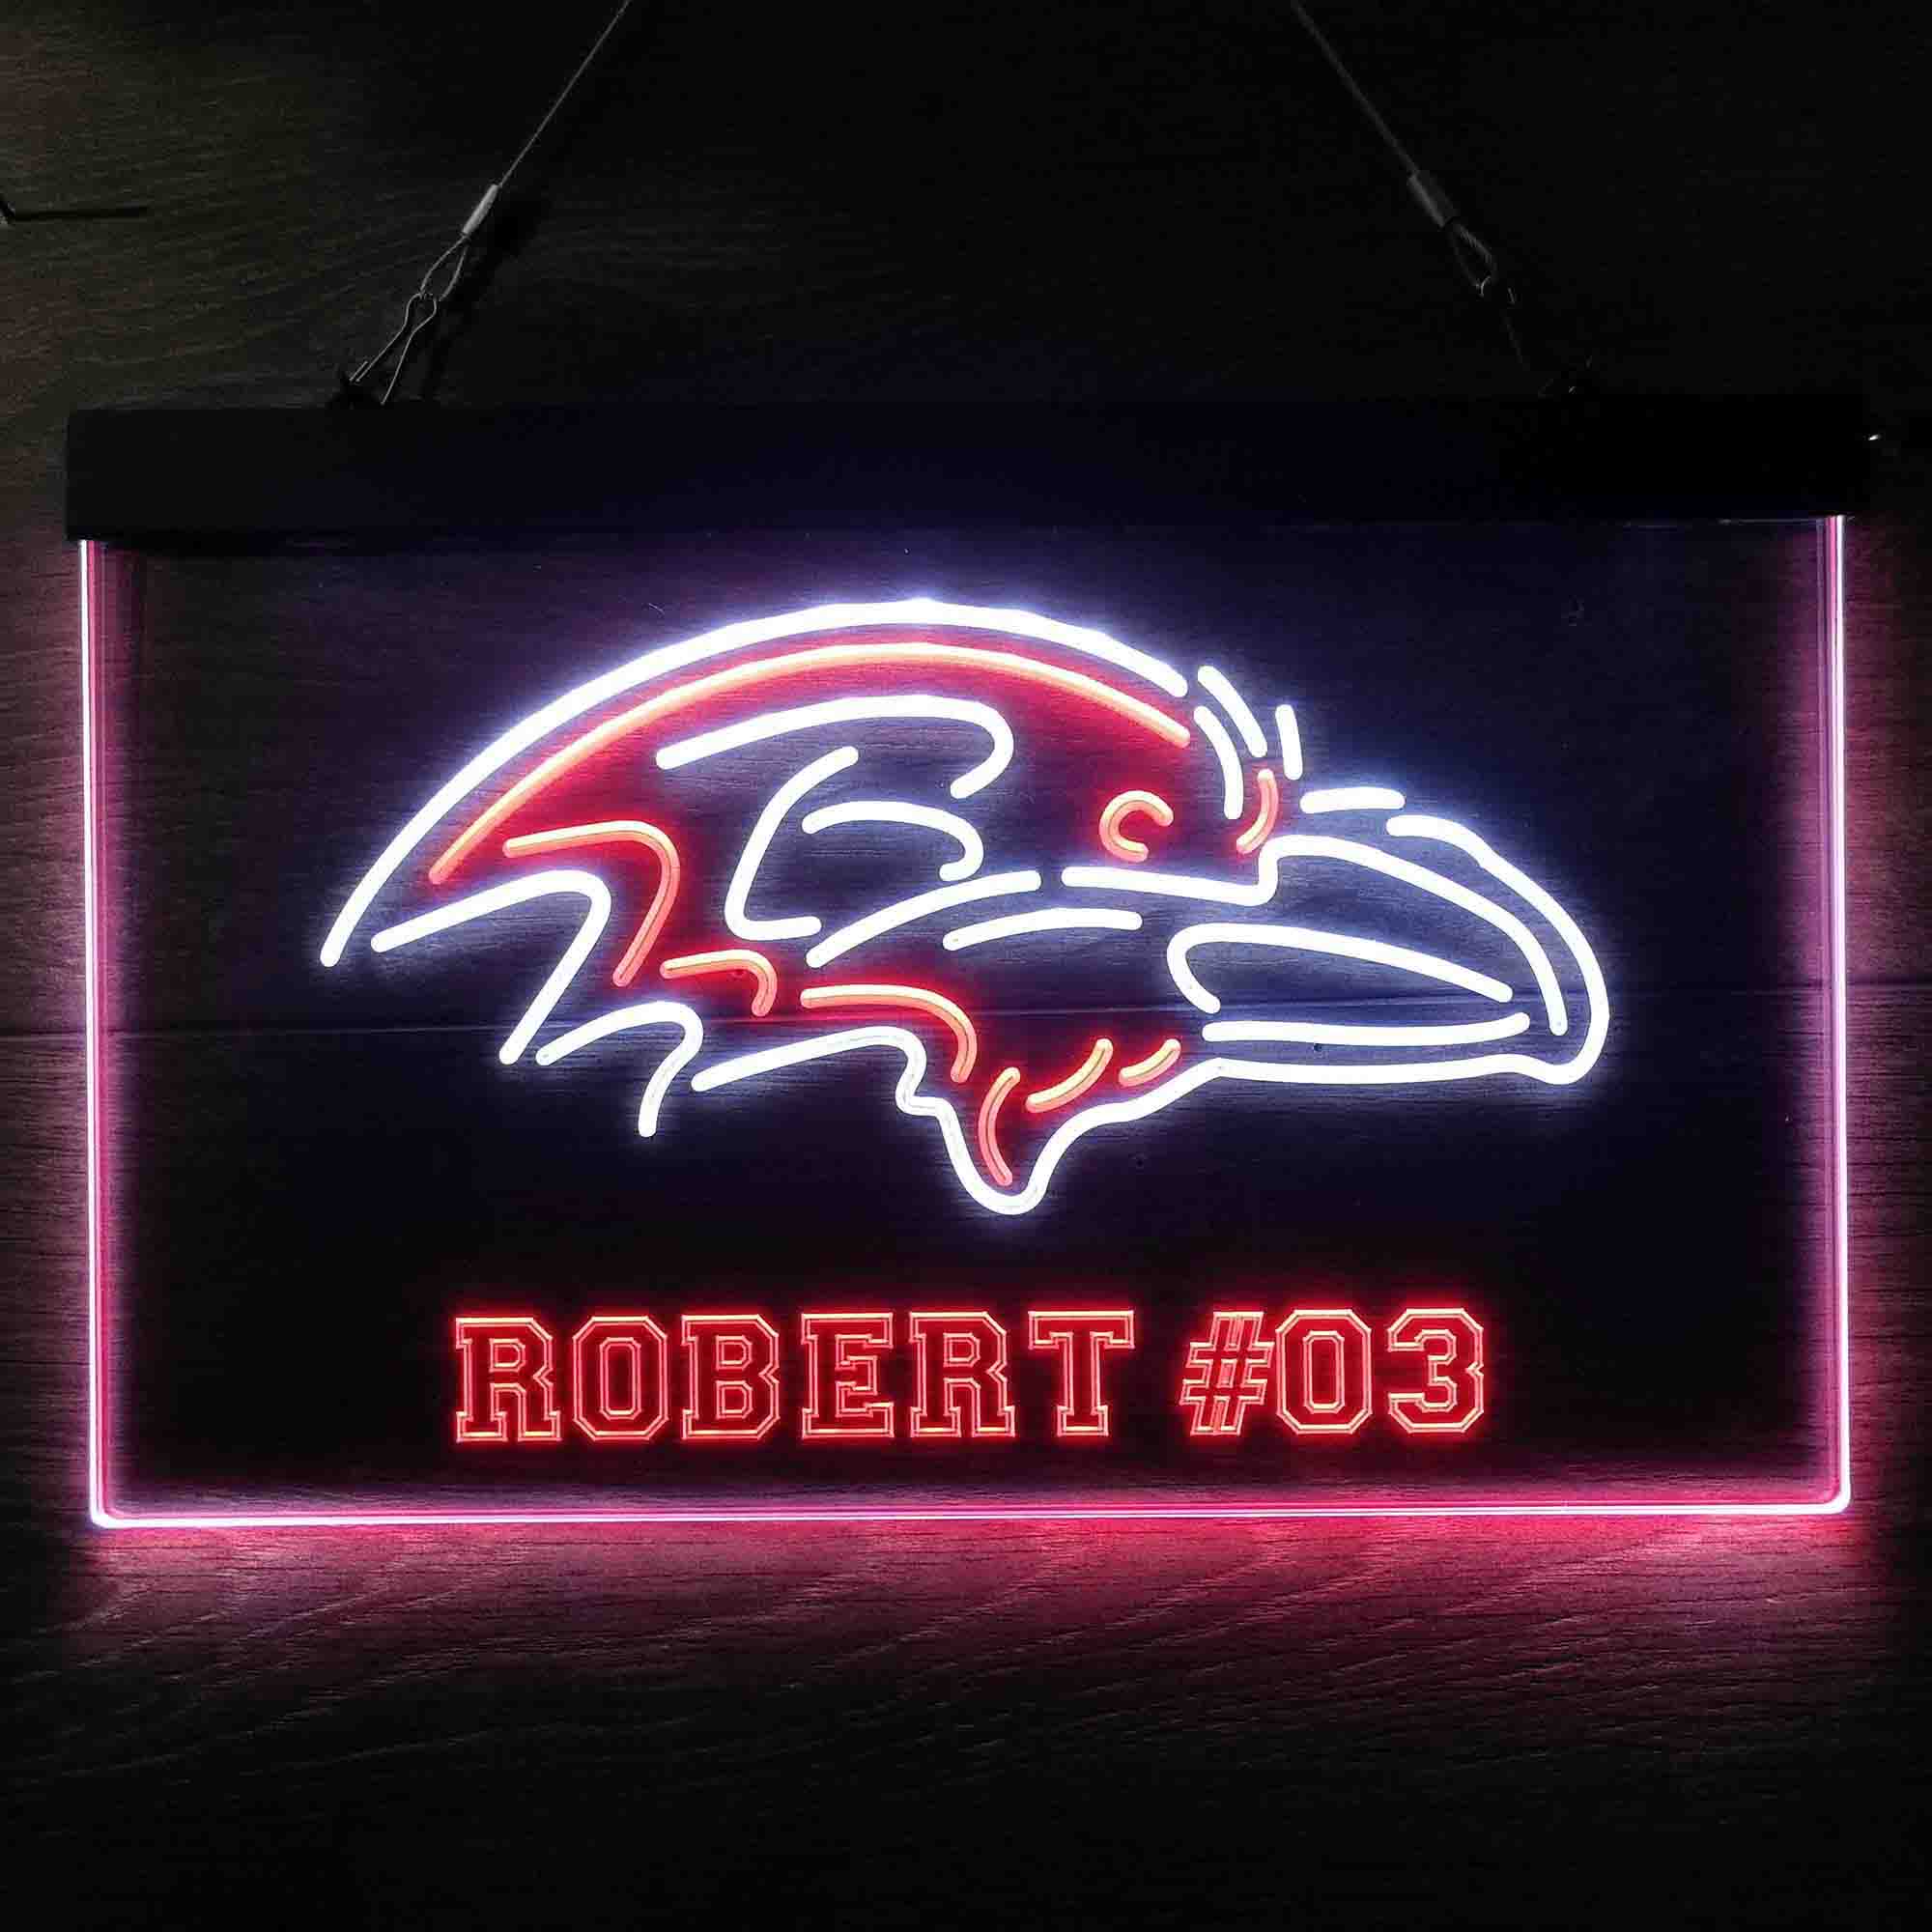 Personalized Baltimore Ravens Team Number Neon-Like LED Sign